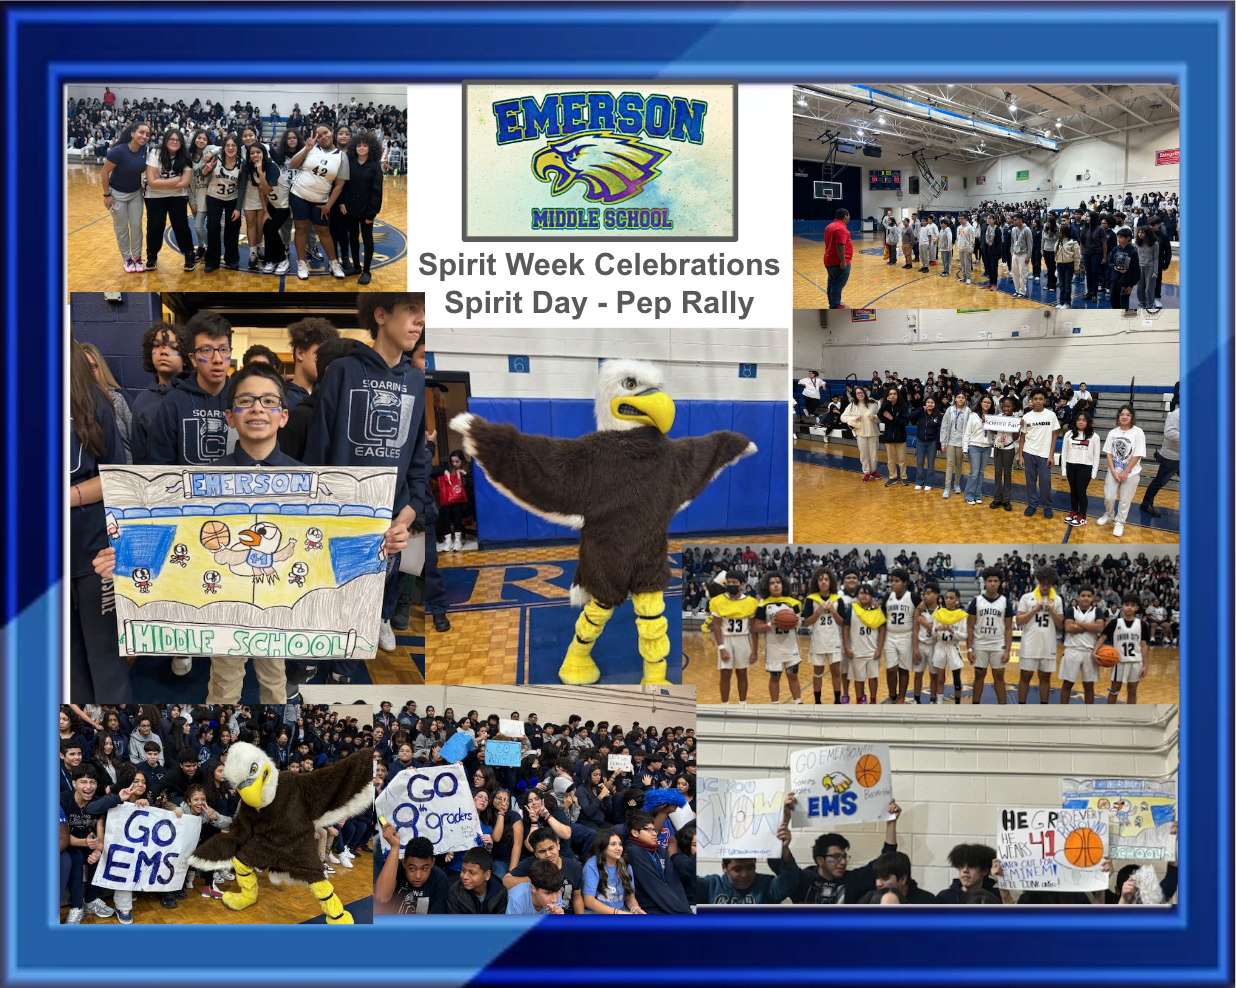 Pep Rally at the Emerson Middle School